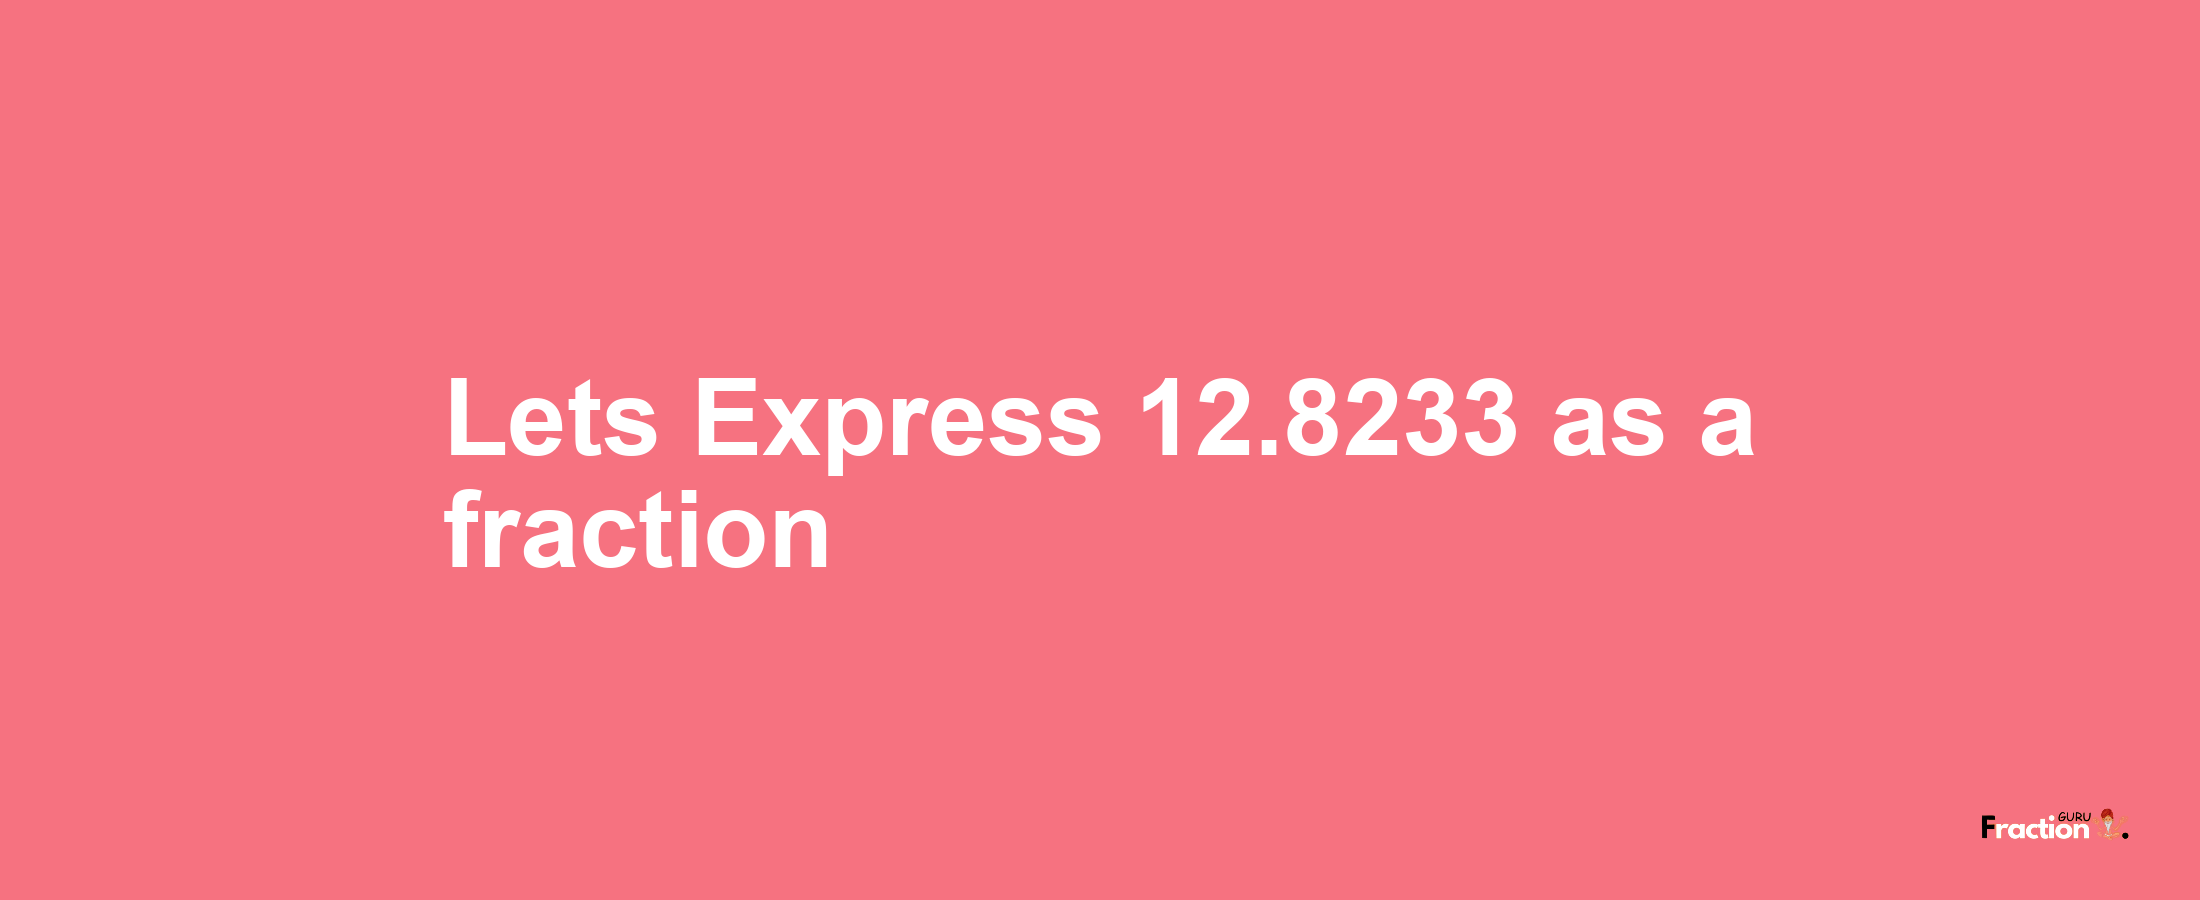 Lets Express 12.8233 as afraction